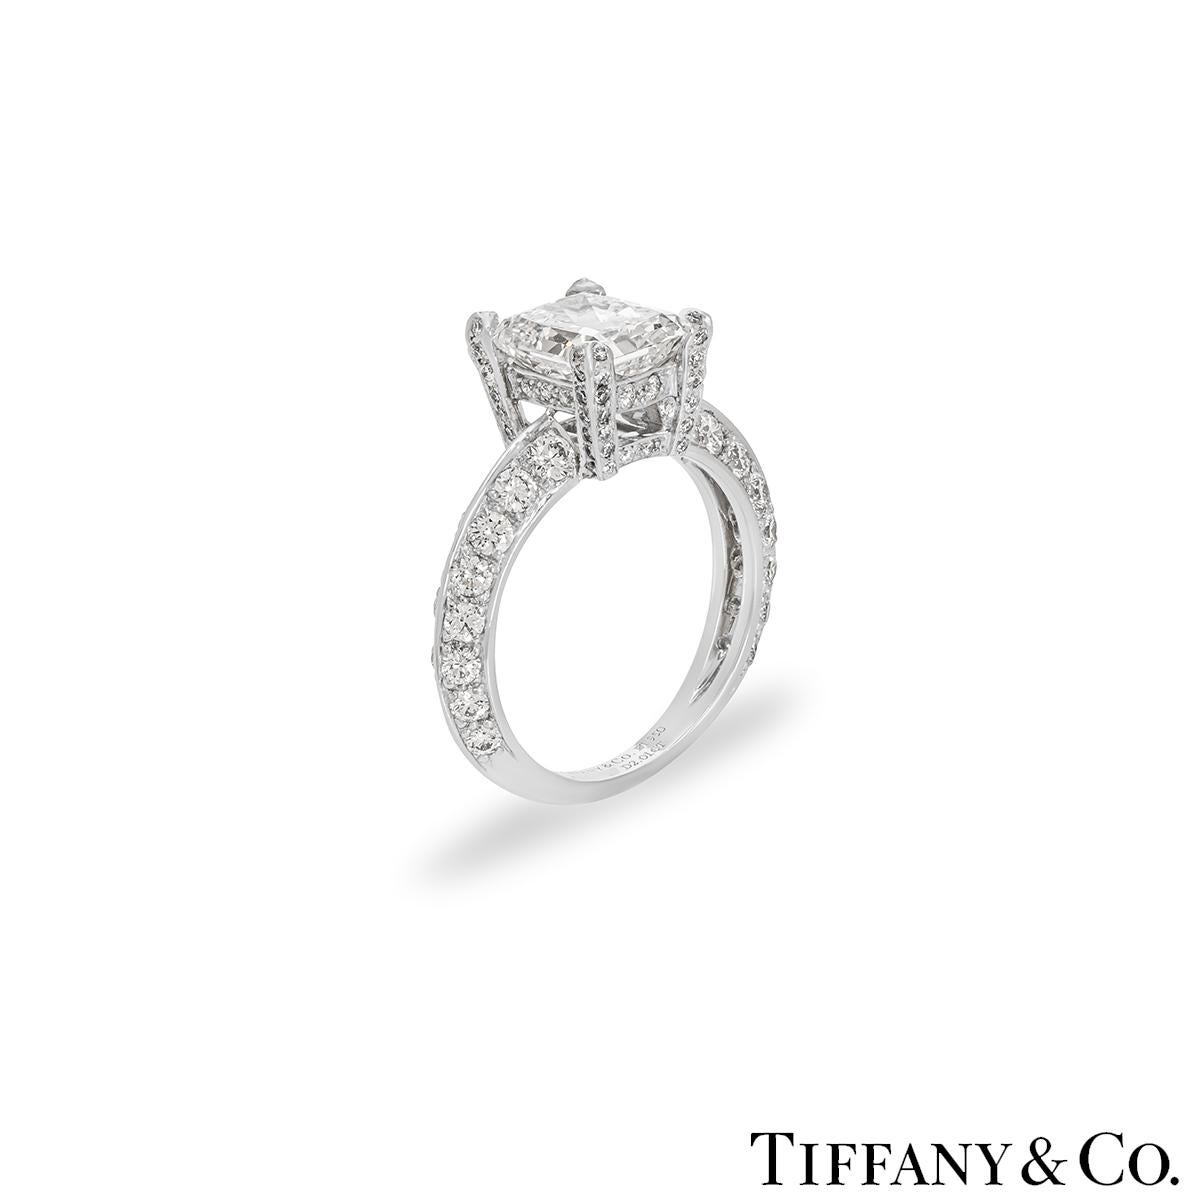 GIA Certified Tiffany & Co. Platinum Radiant Cut Diamond Ring 2.01 Carat G/IF In Excellent Condition For Sale In London, GB